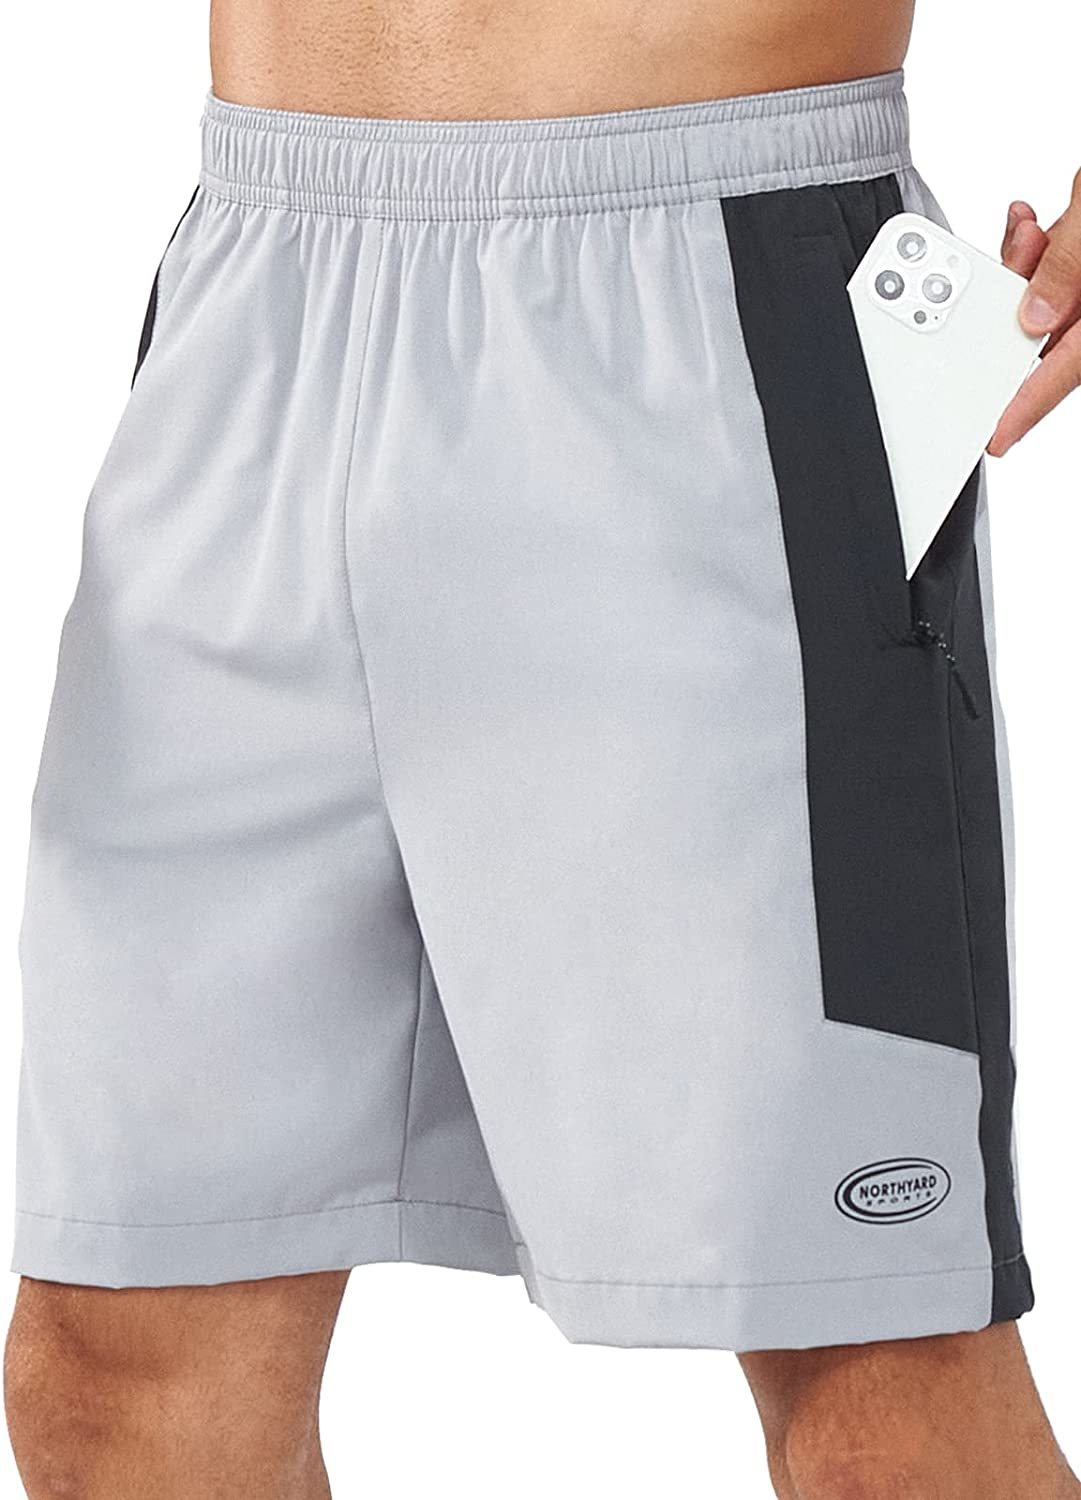 Men'S 7" Active Exercise Quick Dry Swim Trunks Running Gym Workout Sport Shorts - $35.97